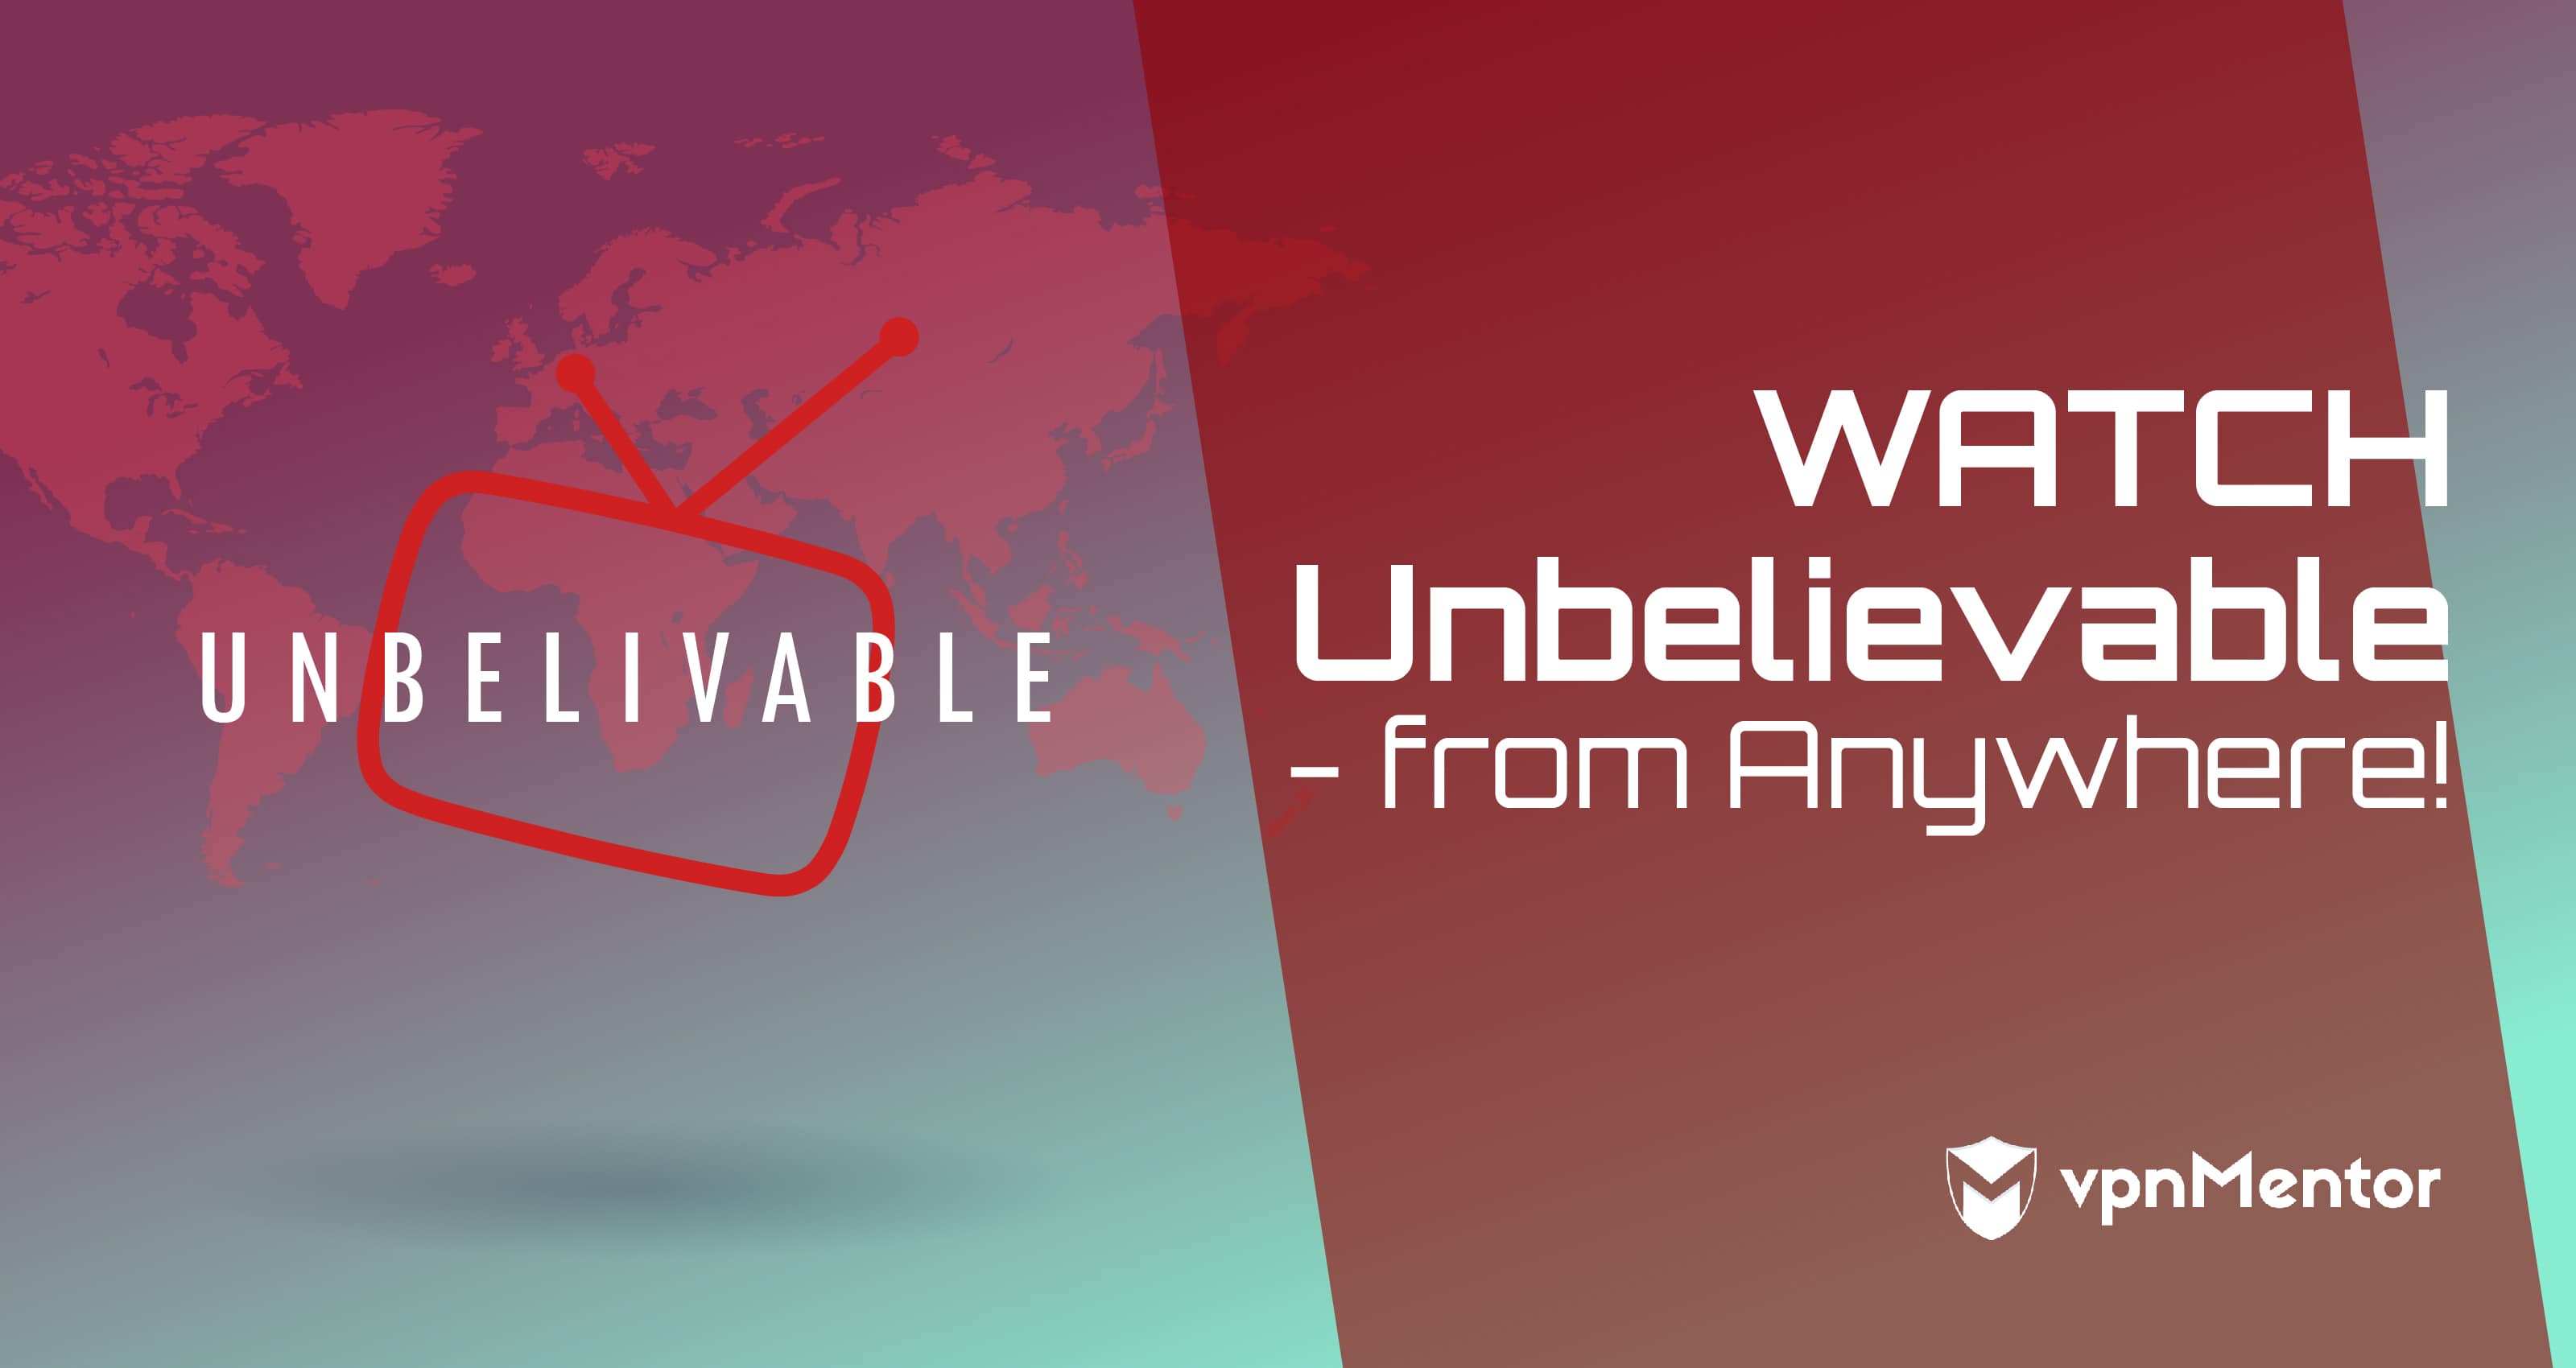 Watch Unbelievable From Anywhere in 2023!